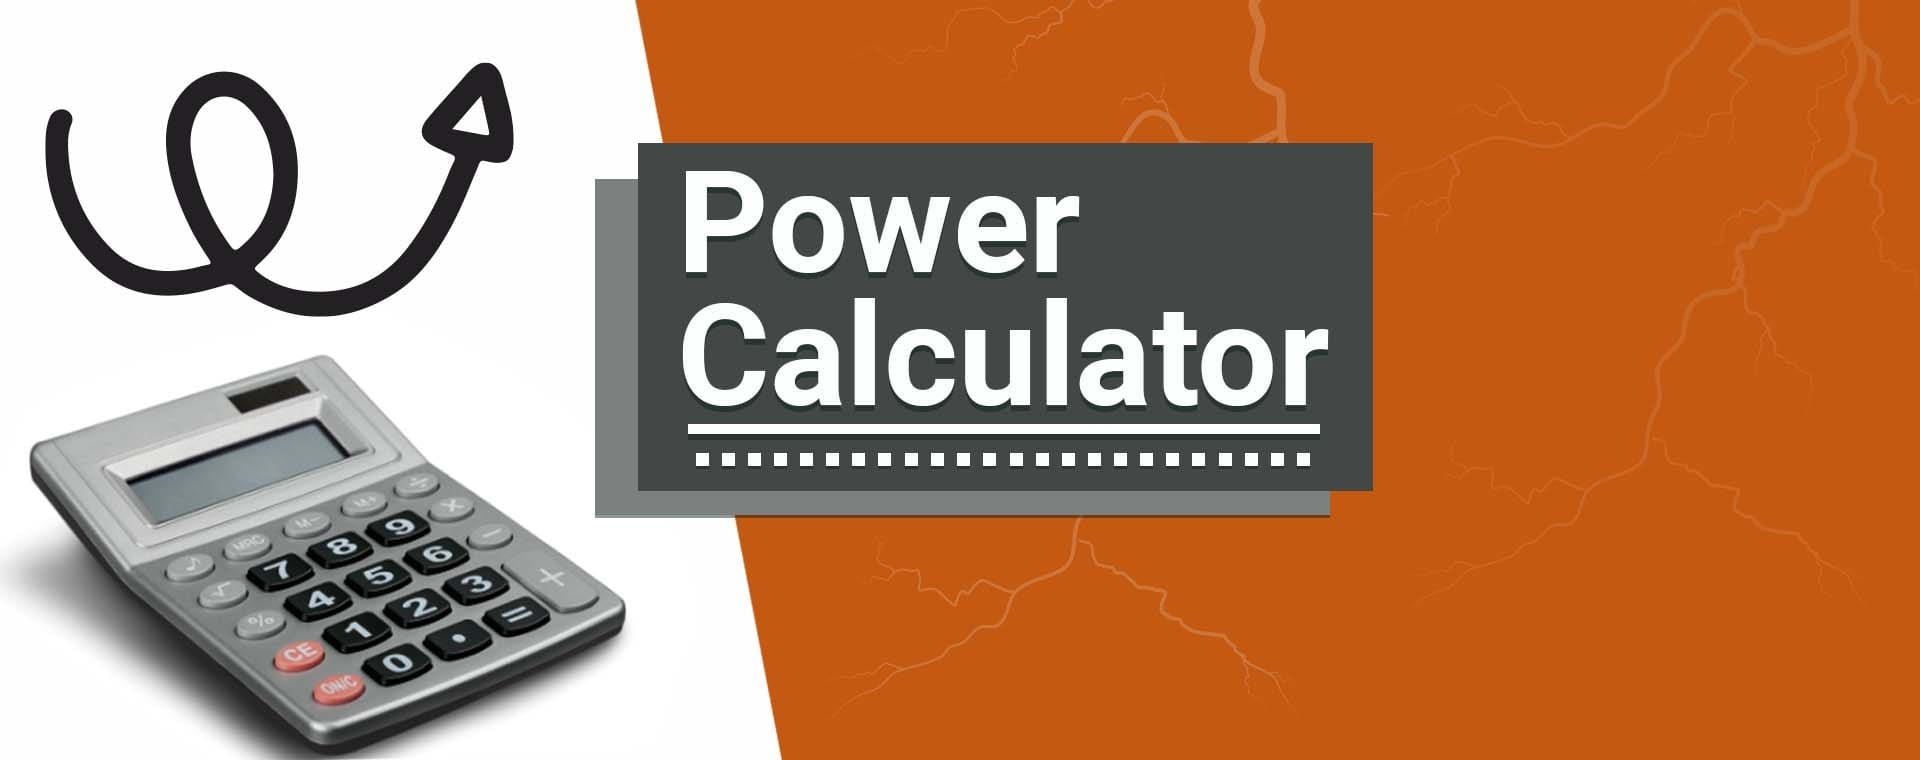 Power Calculation : energy and power calculators